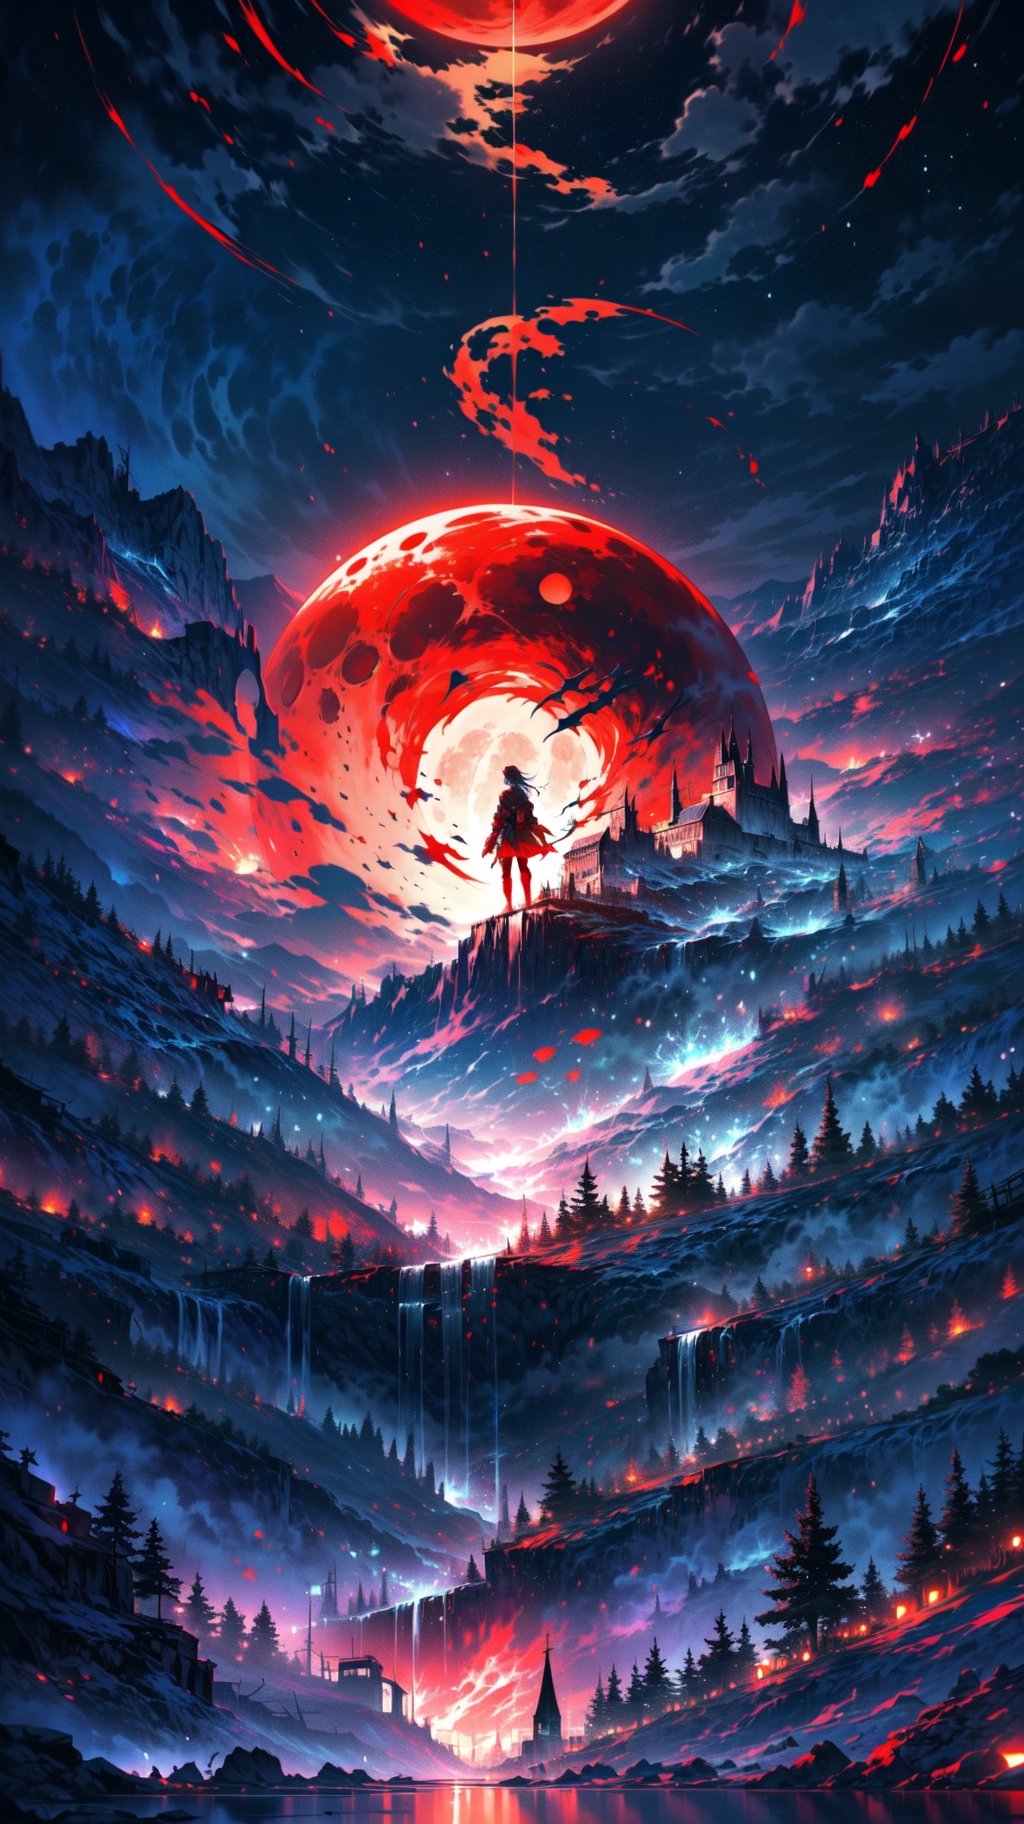 Generate a digital art image featuring a surreal and otherworldly scene of a red moon rising over a mountainous landscape. The moon, large and centrally positioned, casts a red glow over the dark, mountainous terrain. The sky is a deep red, evoking an intense atmosphere. A river flows through the landscape, reflecting the moon's eerie light. Encourage diverse interpretations, suggesting that the image could be seen as a representation of a fantasy world, a post-apocalyptic scenario, or a symbolic expression of the artist's emotions